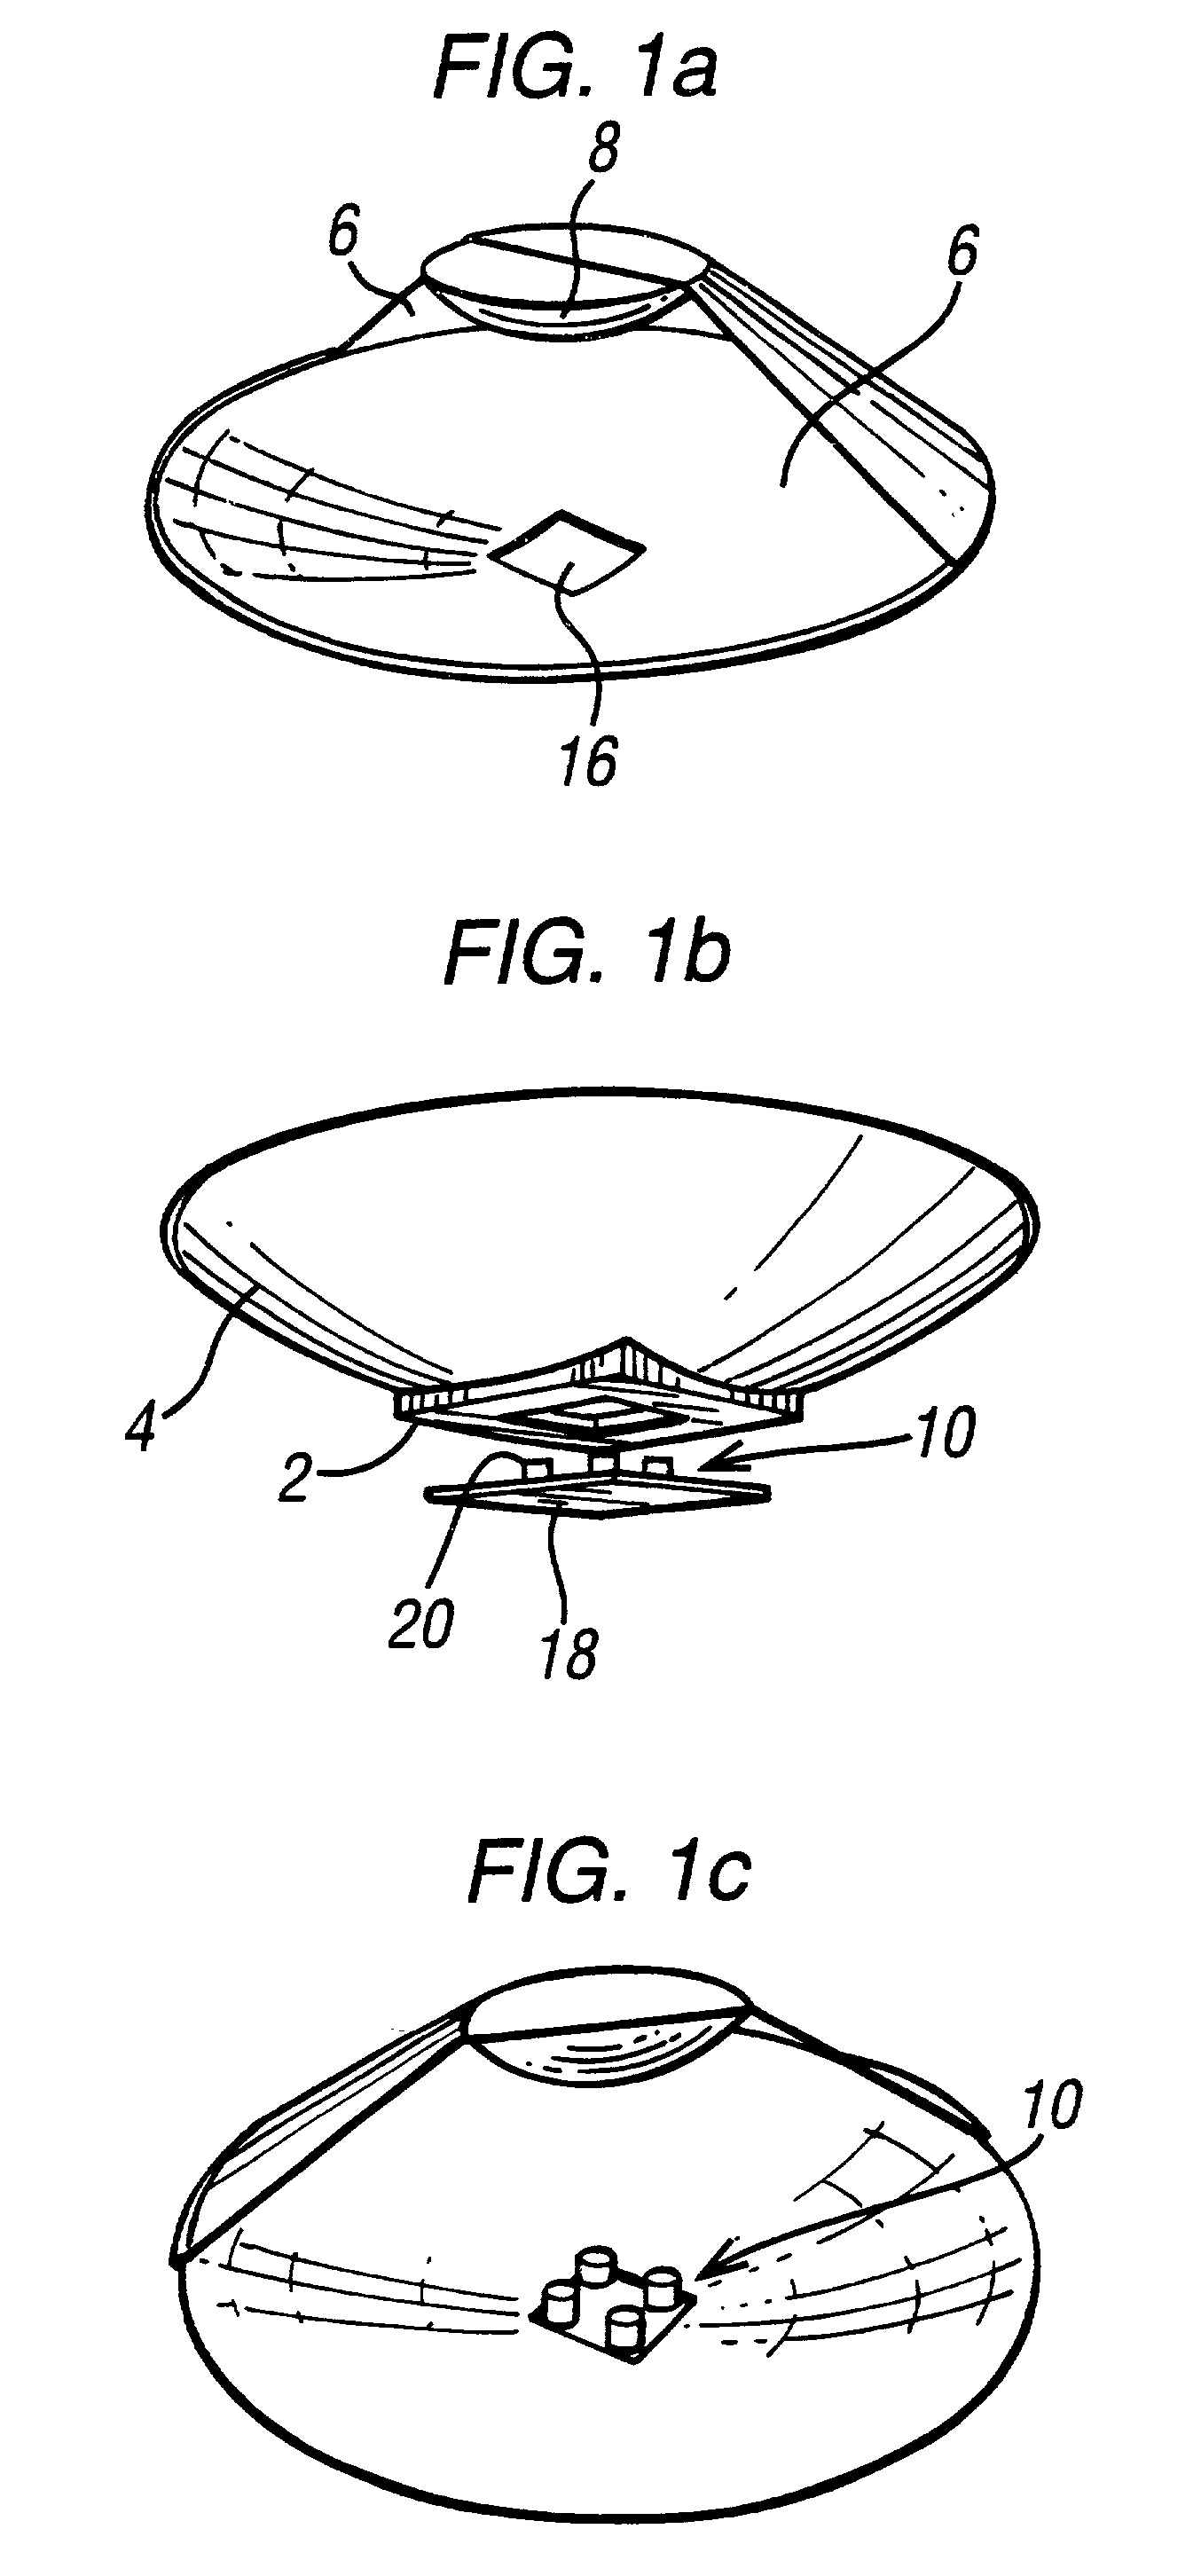 Antenna structure for fixed wireless system